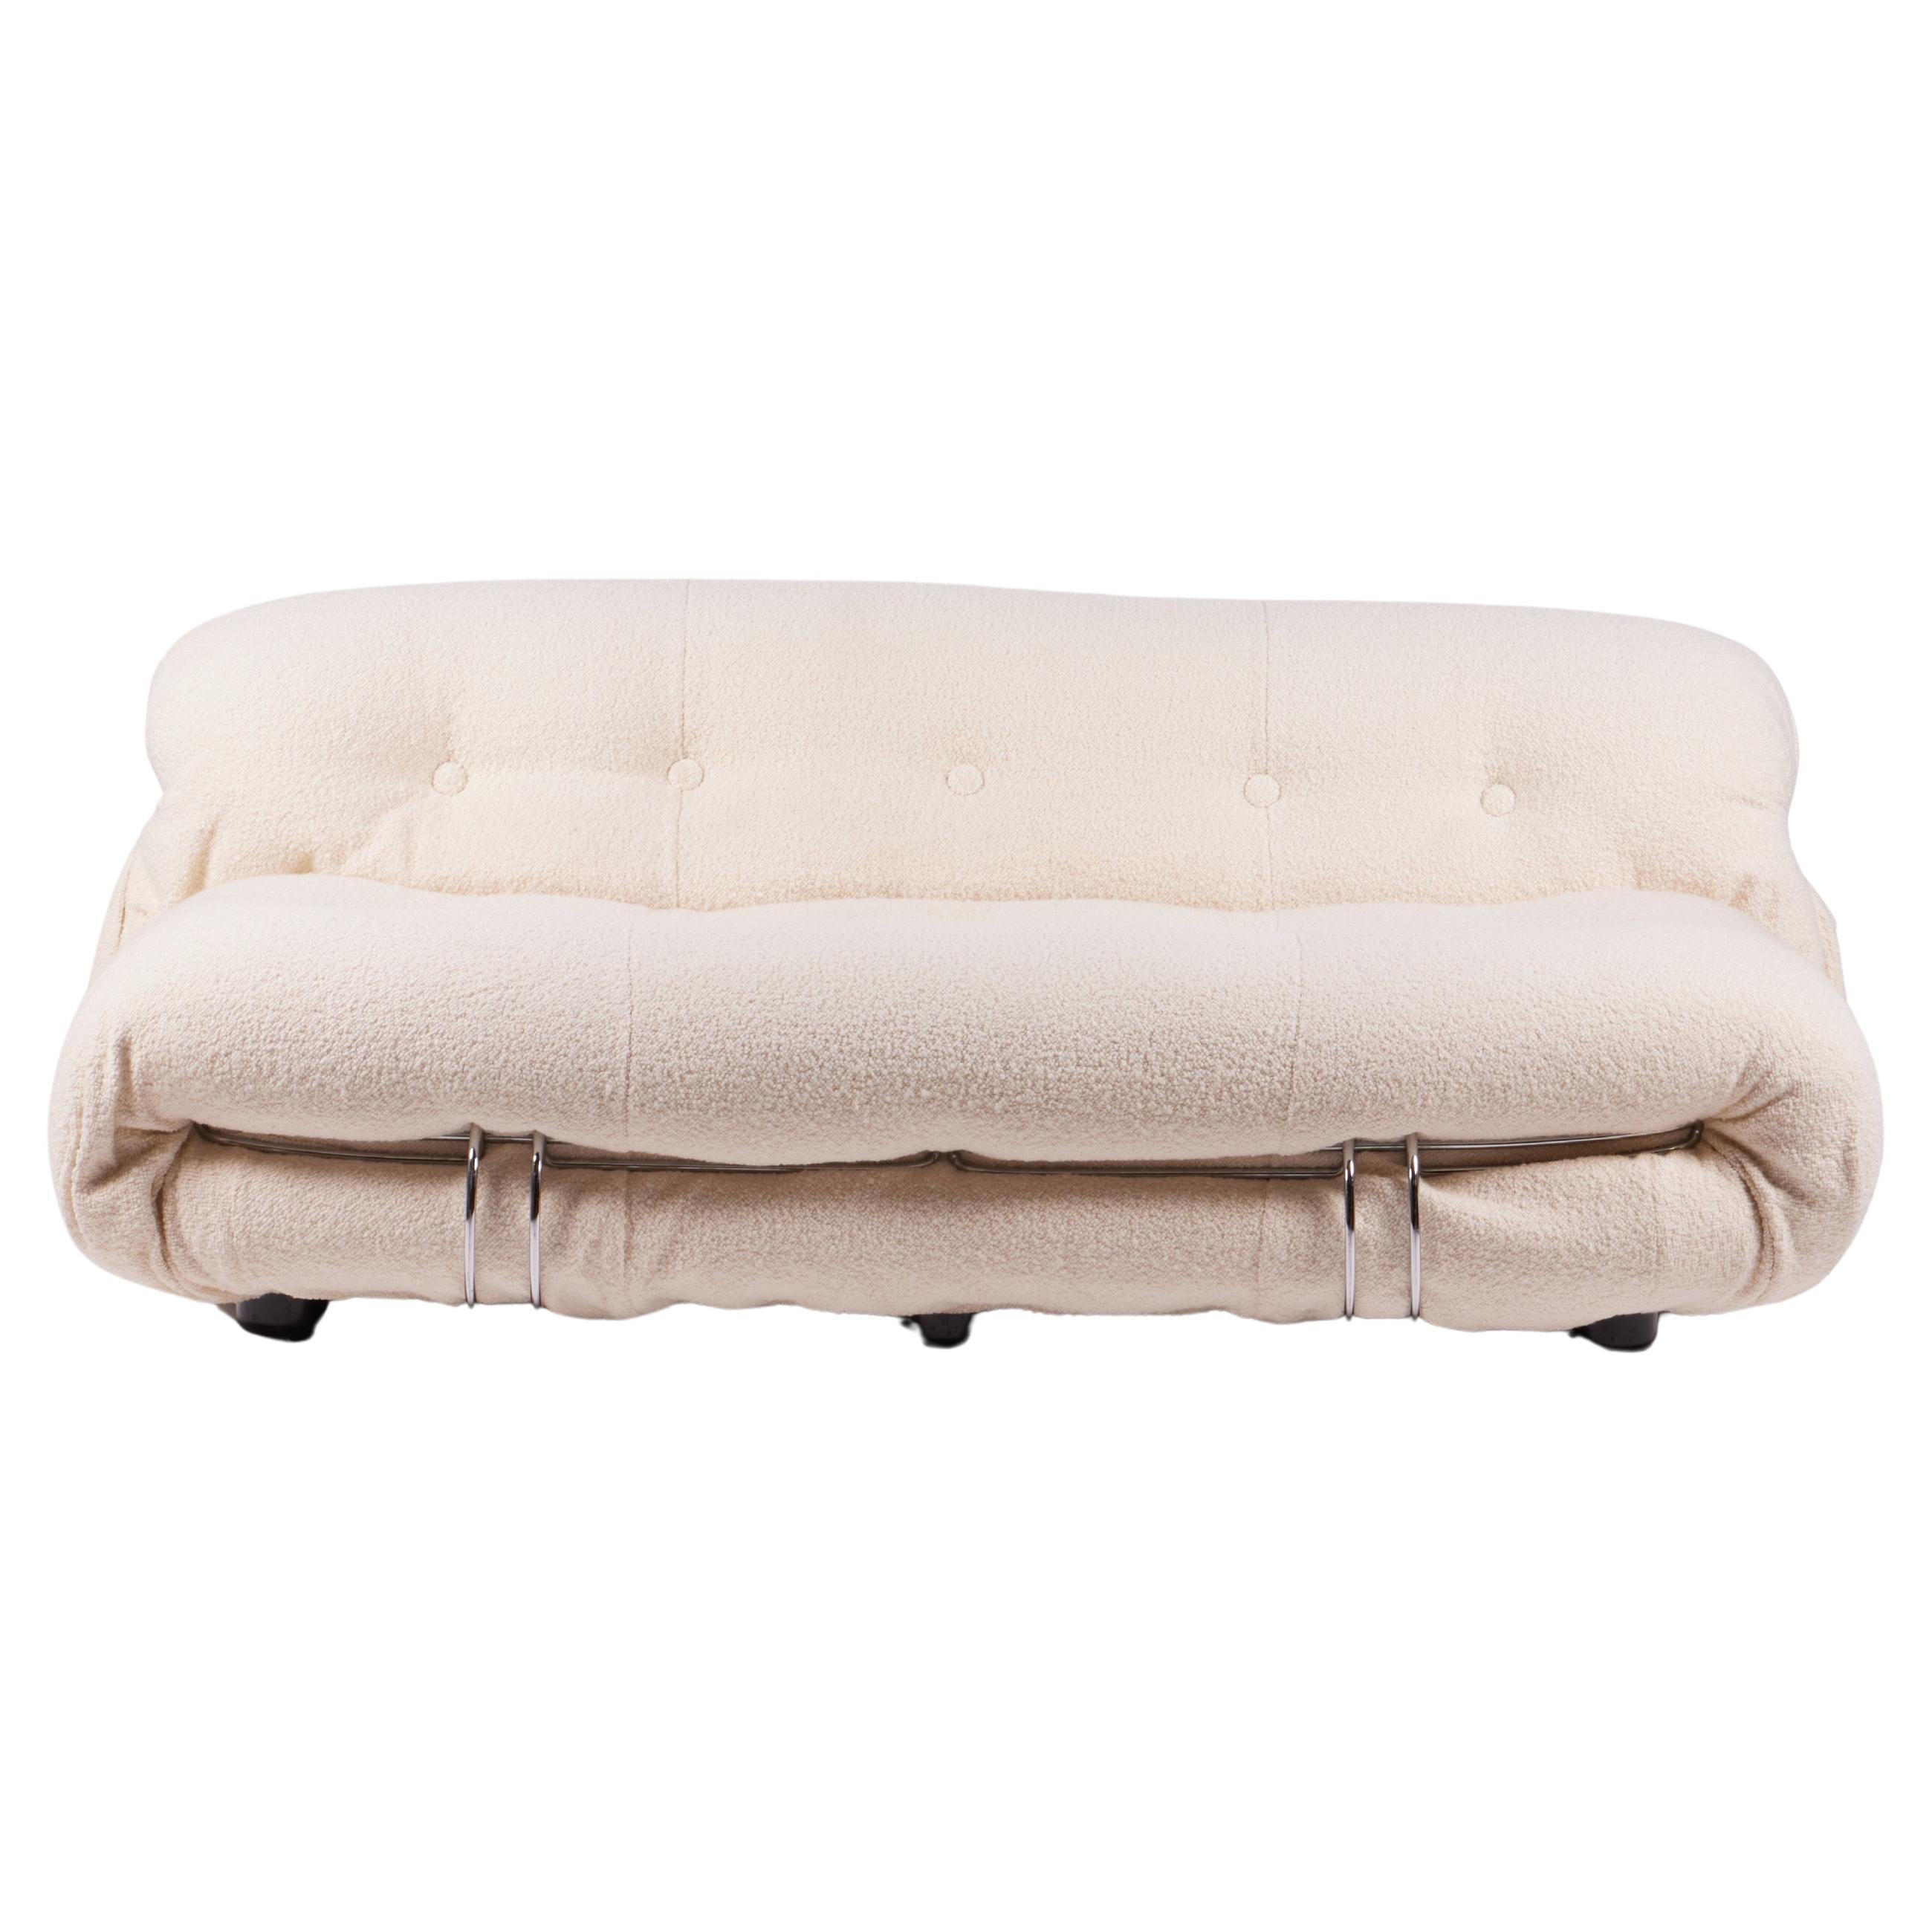 Afra & Tobia Scarpa “Soriana” Sofa for Cassina, Bouclé Wool, 1969

The lustrous original chromed metal structure embraces the soft and voluptuous alpaca boucle' volumes in this Mid-Century Italian Design masterpiece. 

The sofa has been